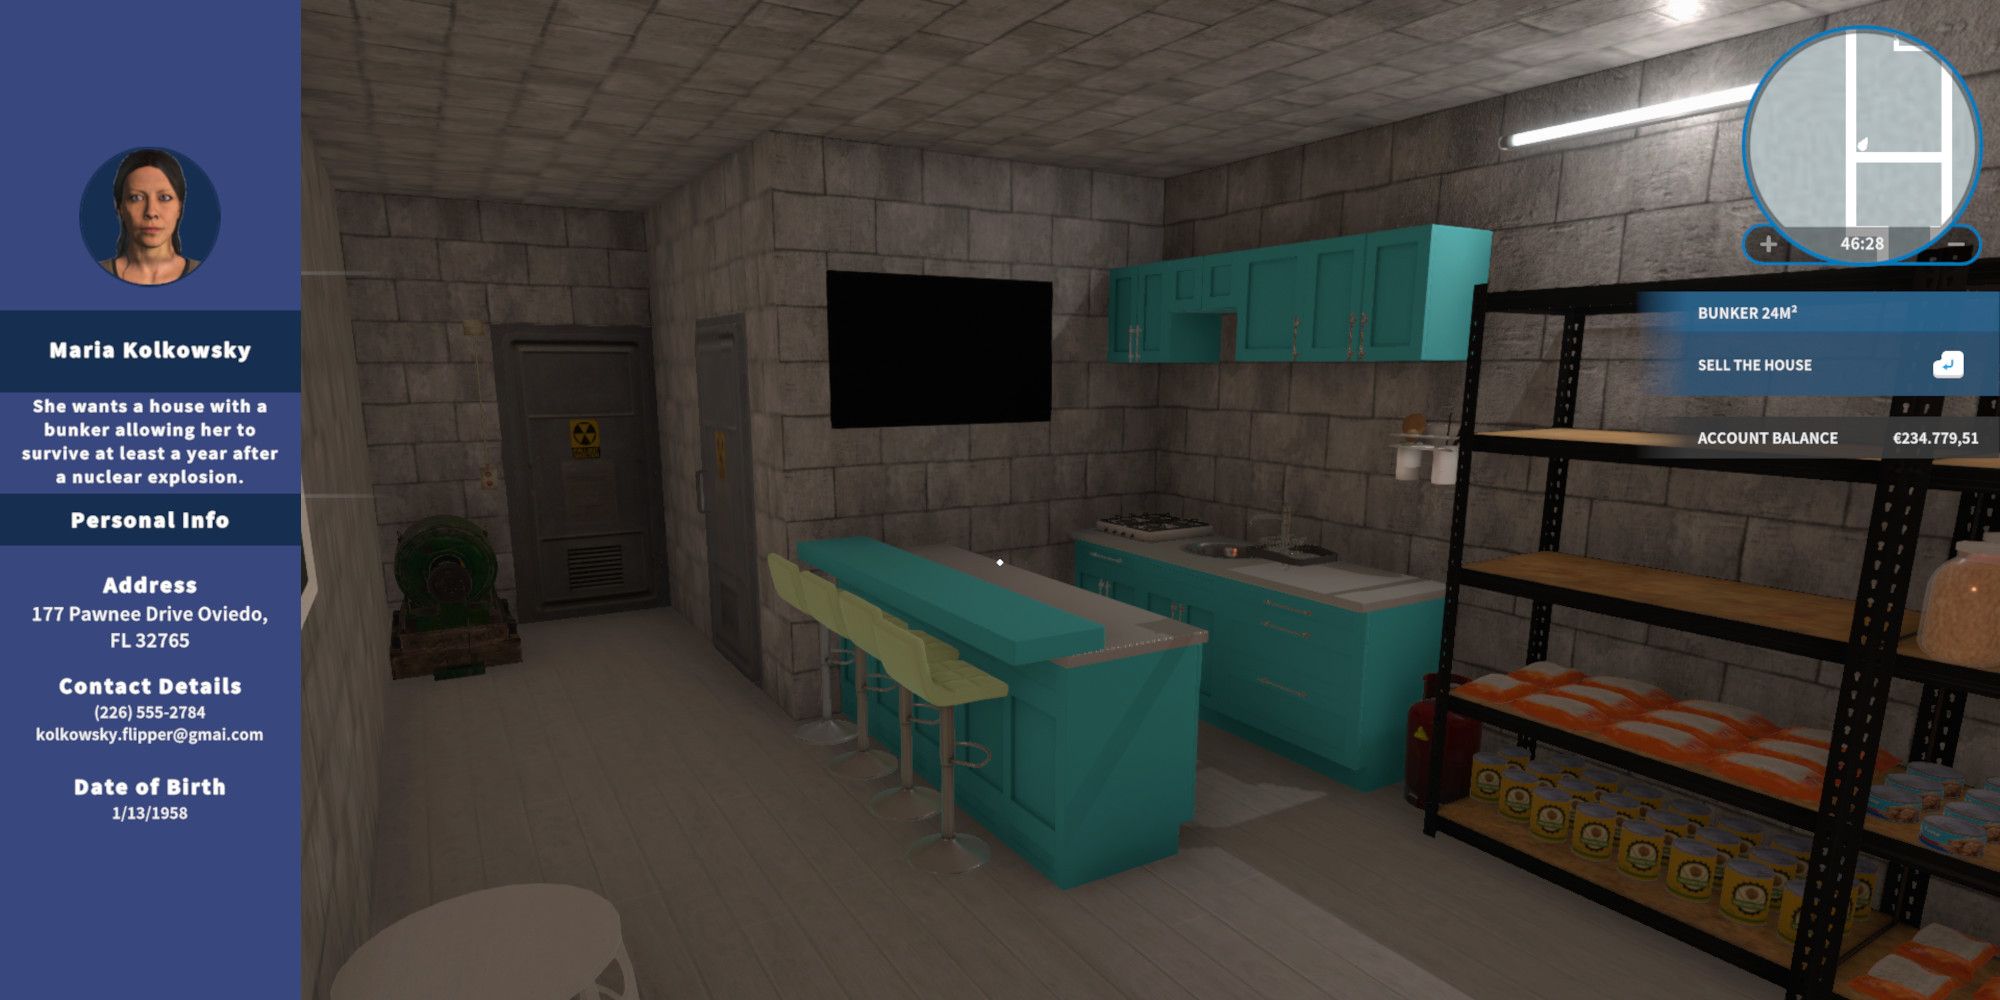 House Flipper Maria Kolkowsky bio next to a bunker kitted out with a kitchen, breakfast bar, tv, and stock of food